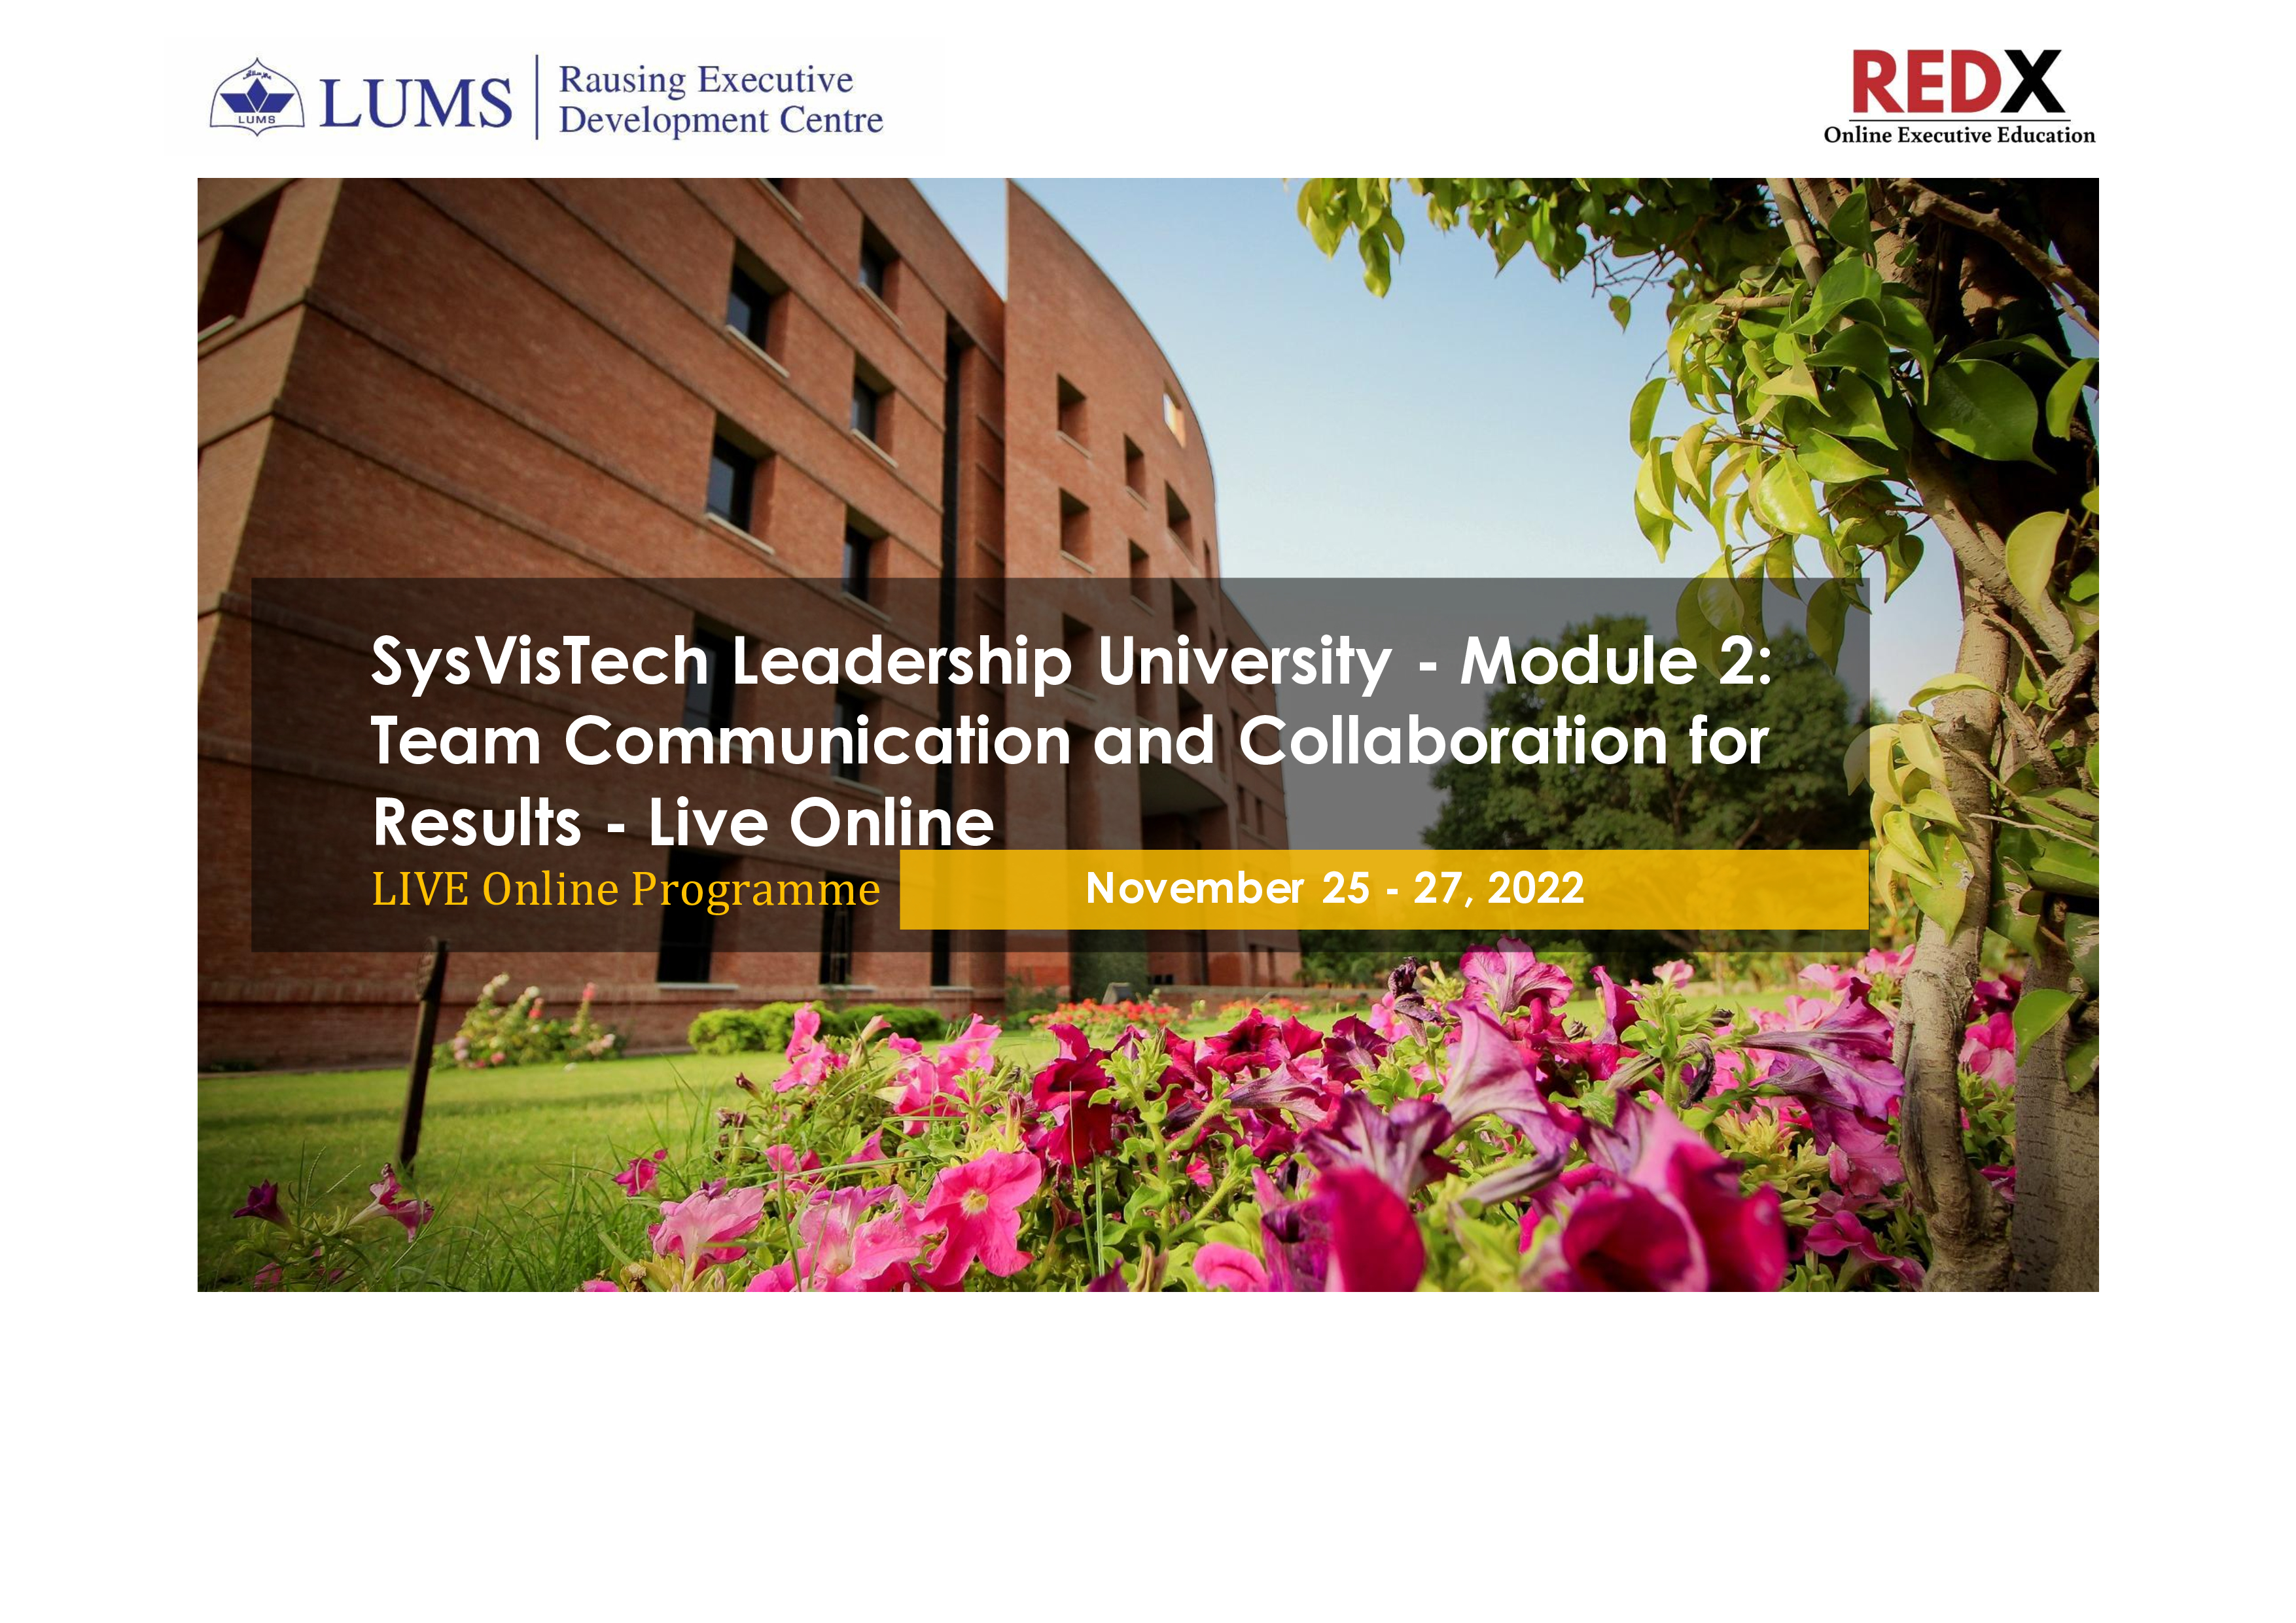 SysVisTech Leadership University - Module 2: Team Communication and Collaboration for Results